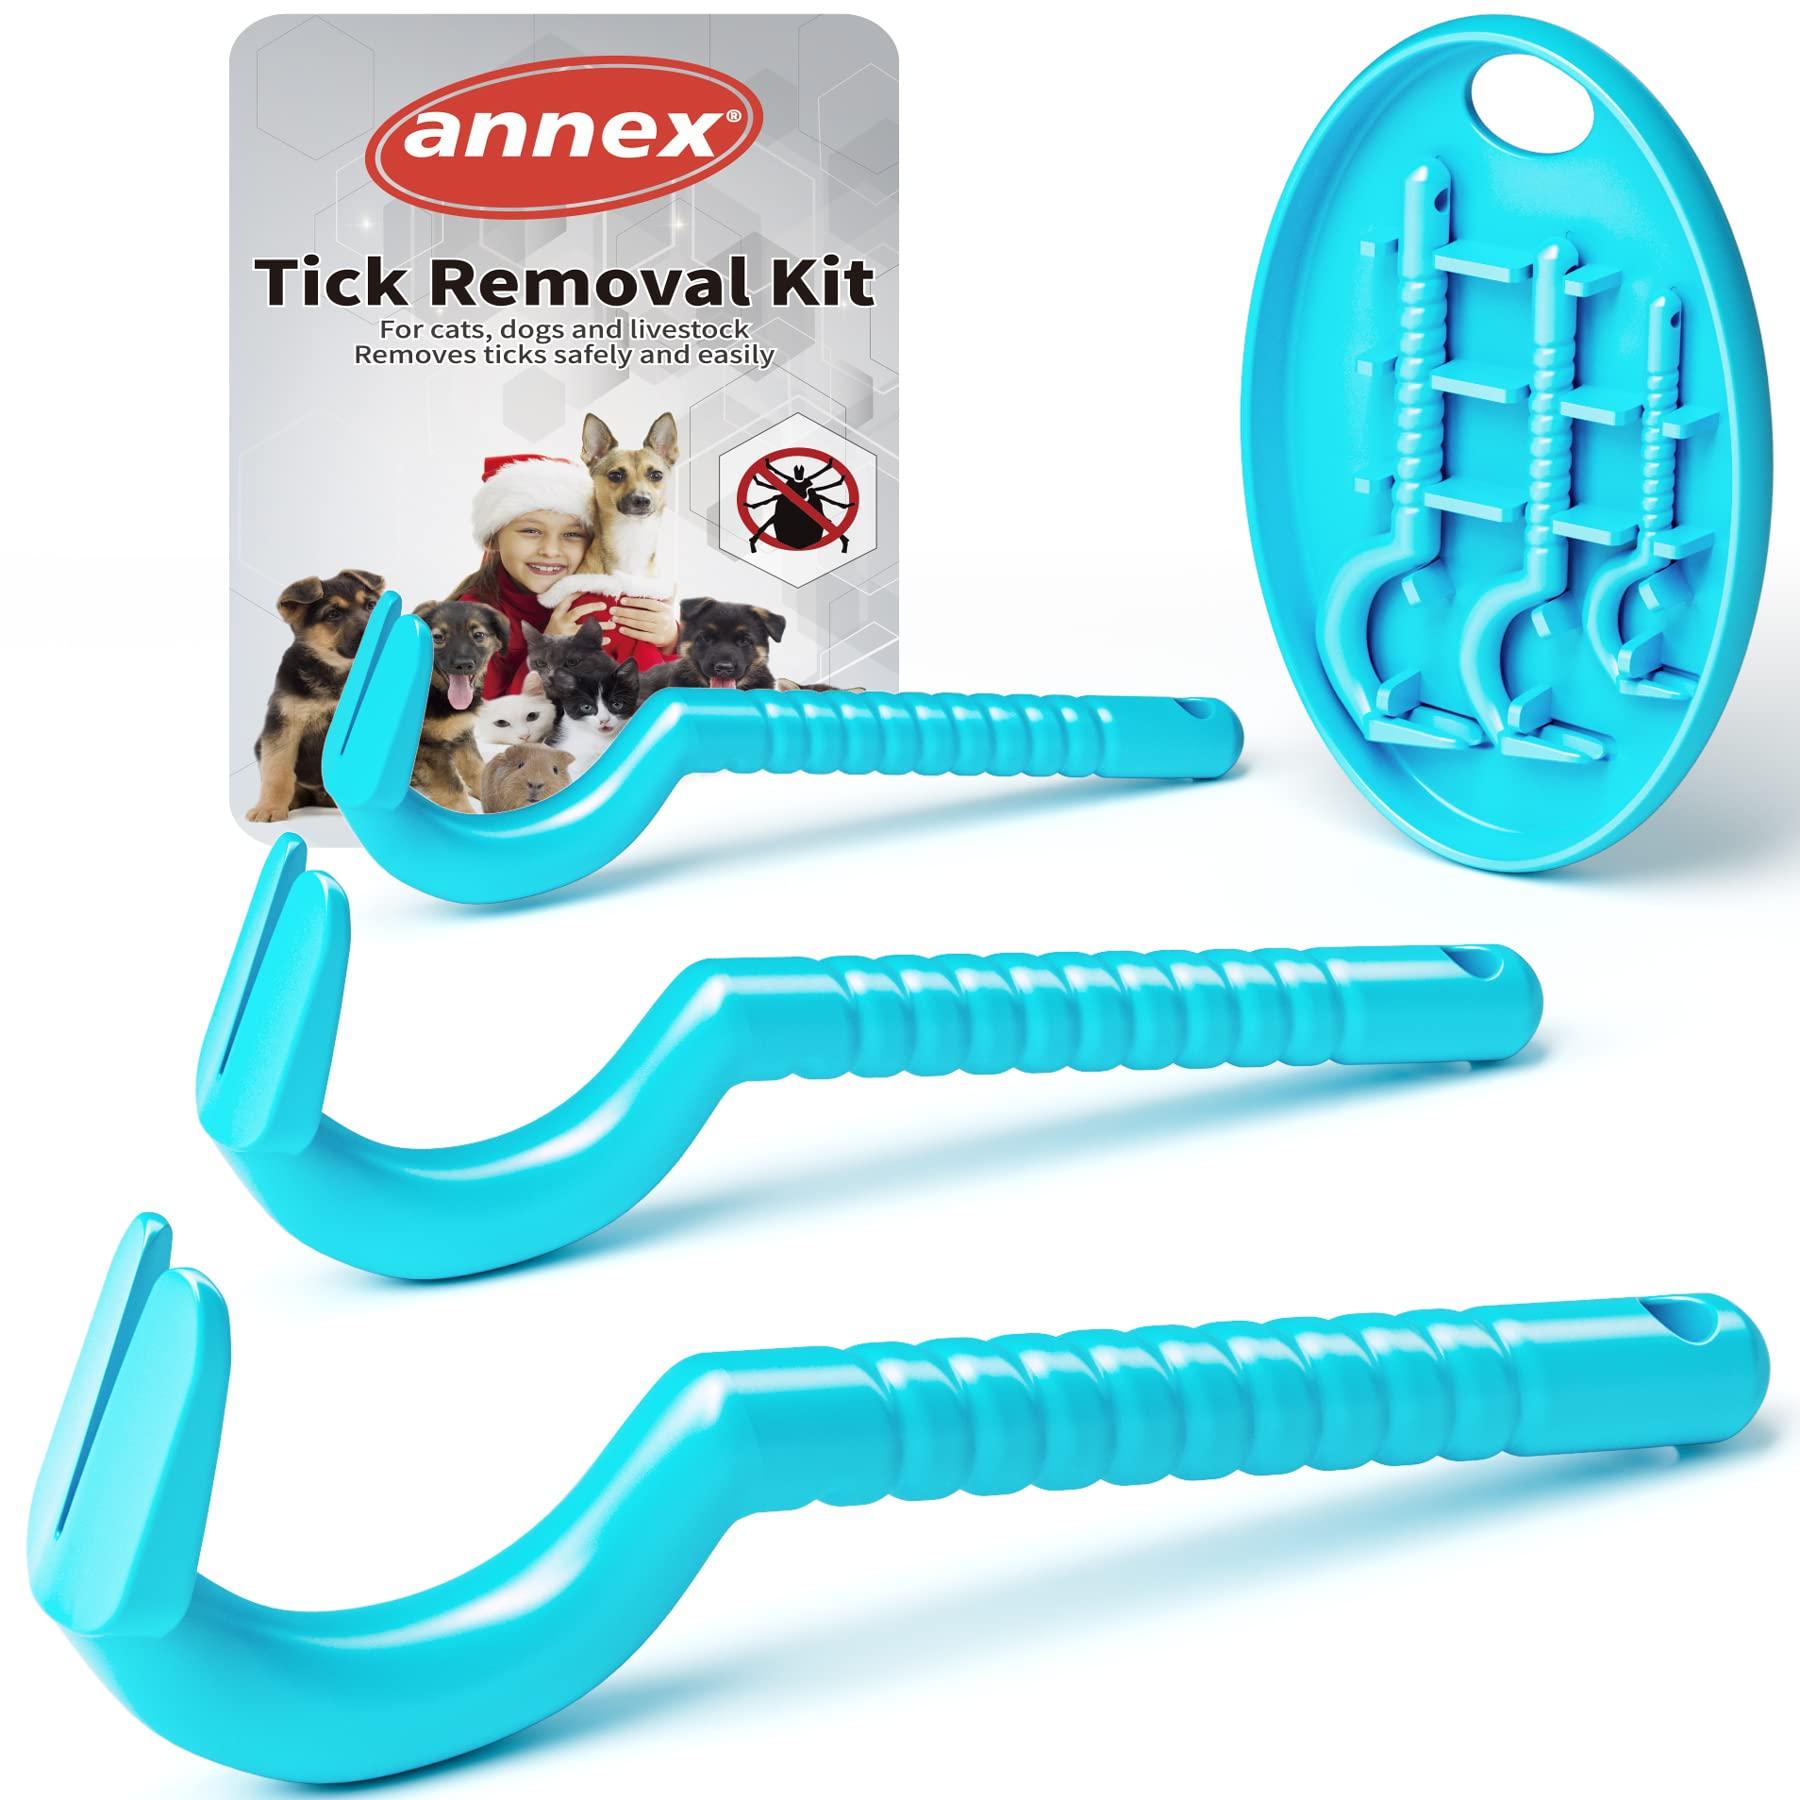 Tick Remover Tool for Dogs, cats, and Humans - Painlessly Remove Ticks in Seconds - Set of 3 Tick Hooks, Including Storage Box